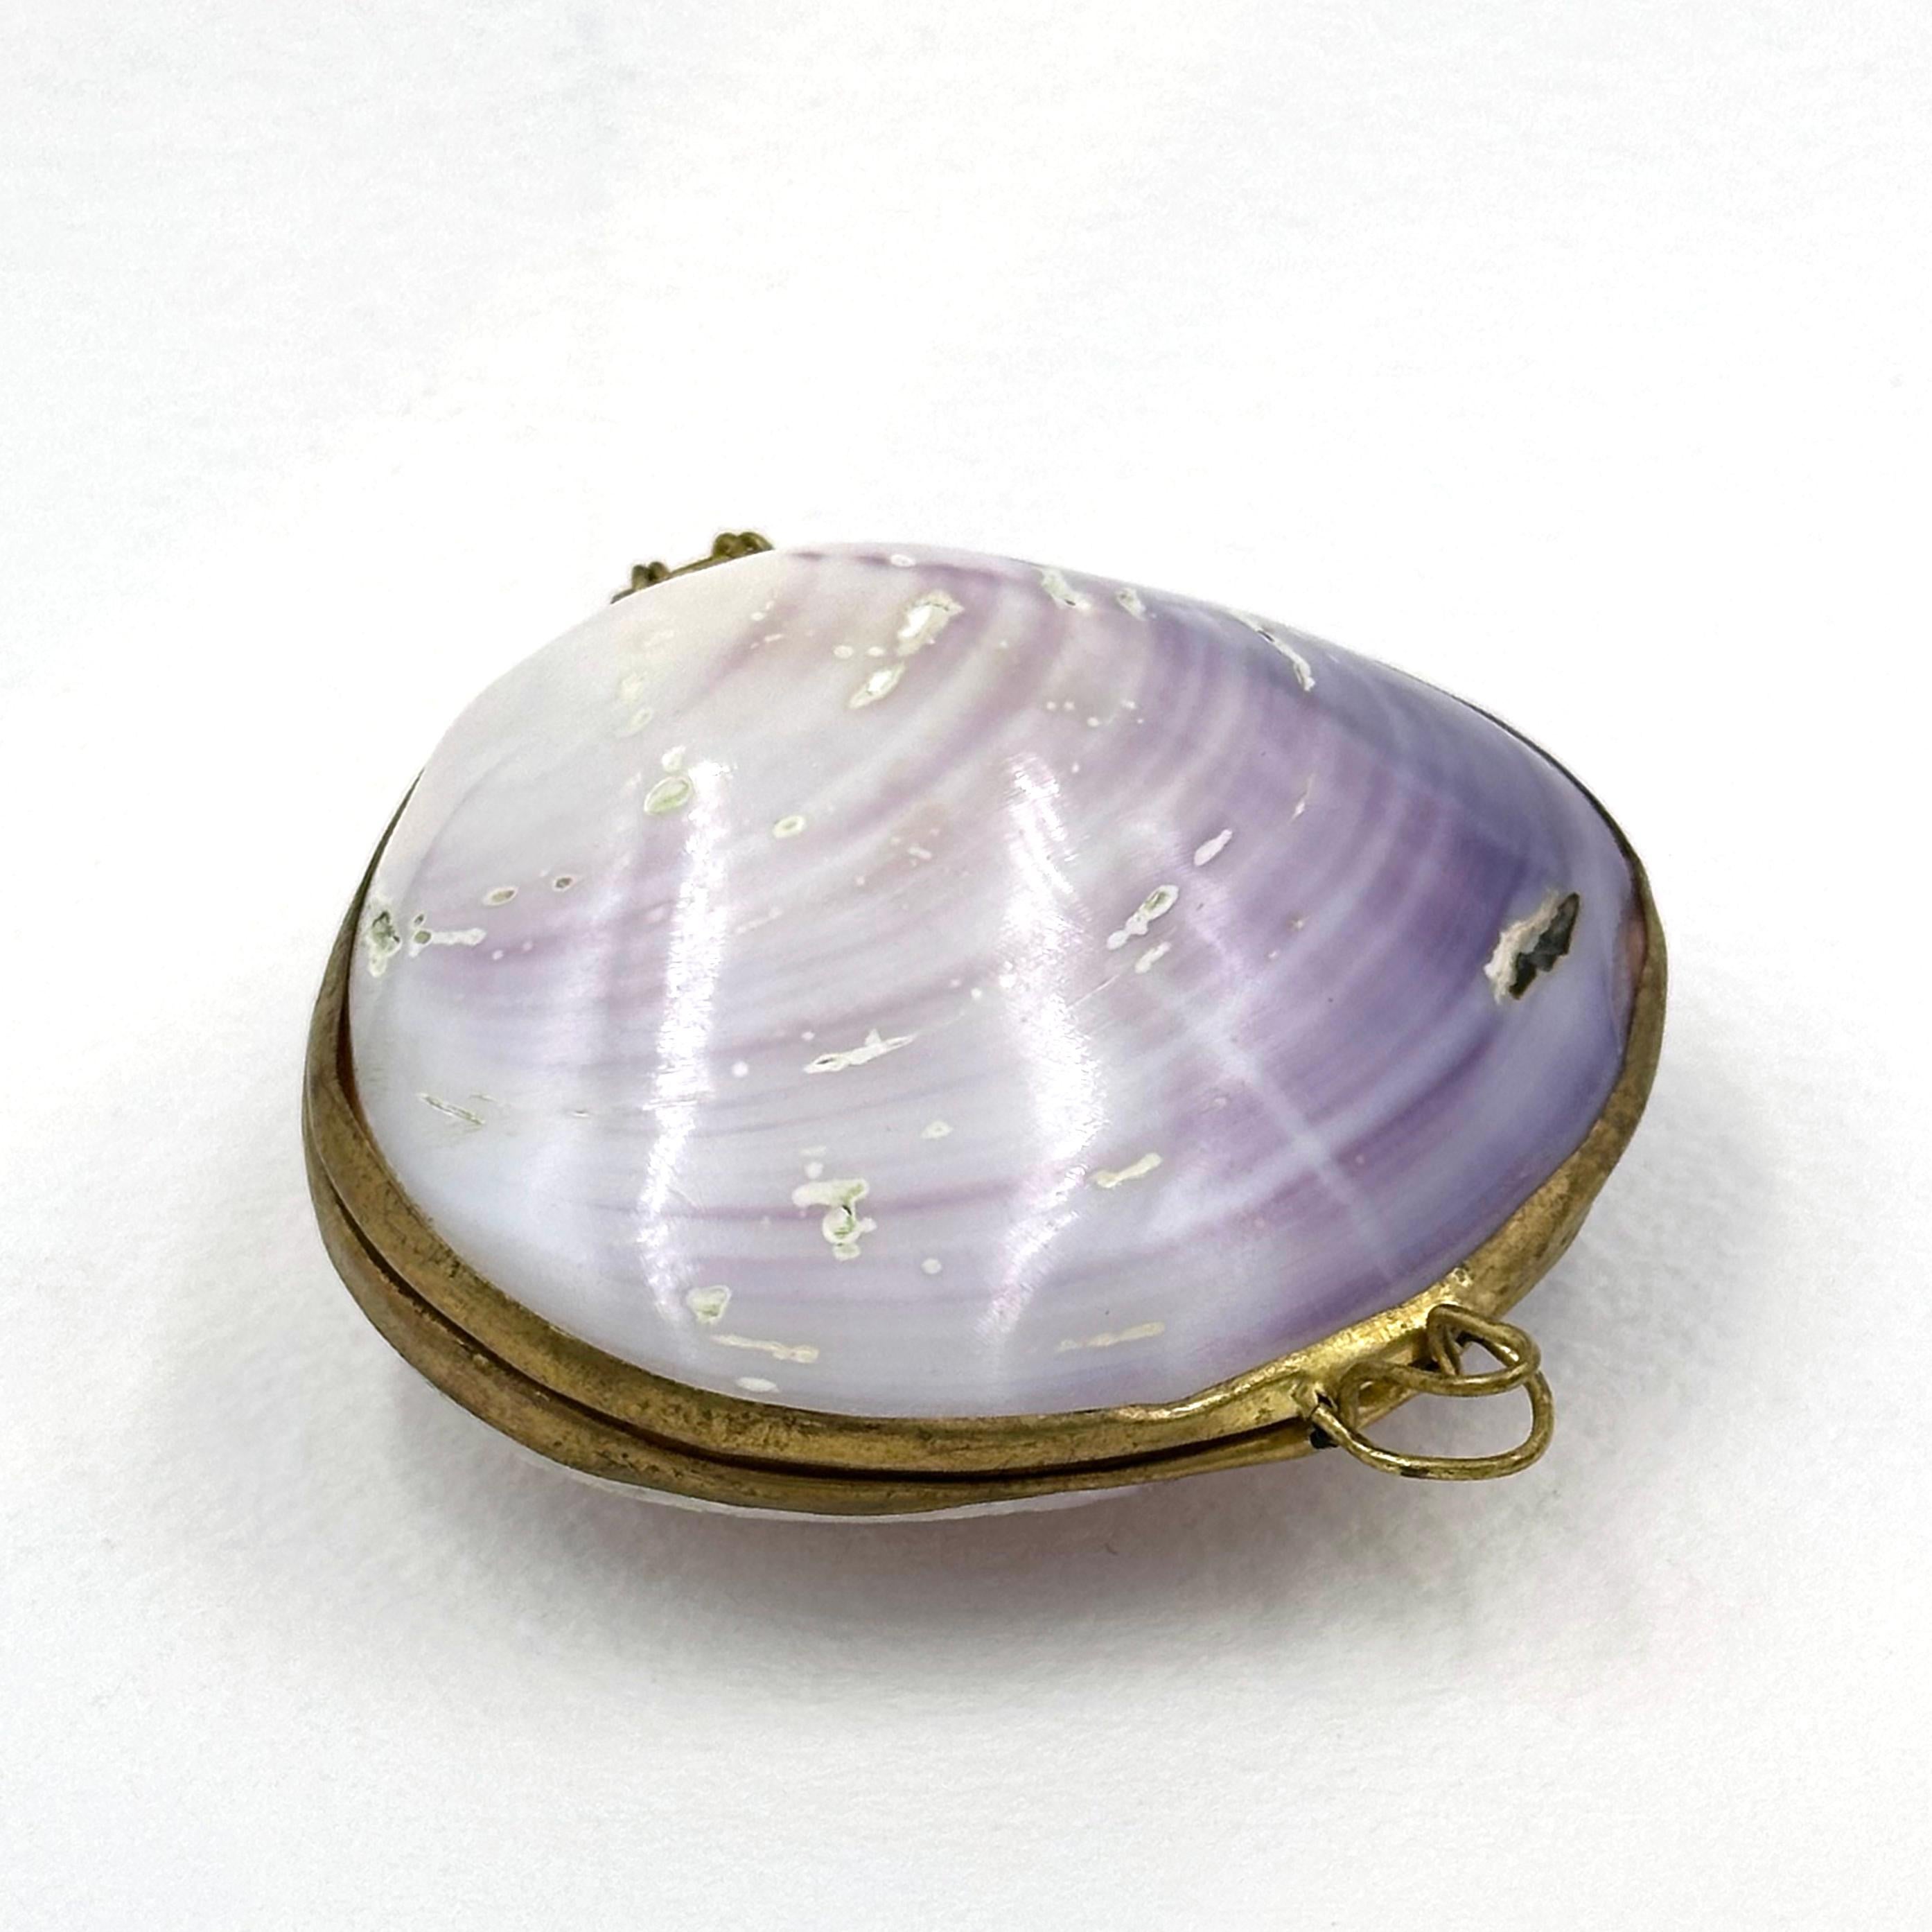 Clamshell Compact

Early 20th century
Clam, gold clasp/interior plating

